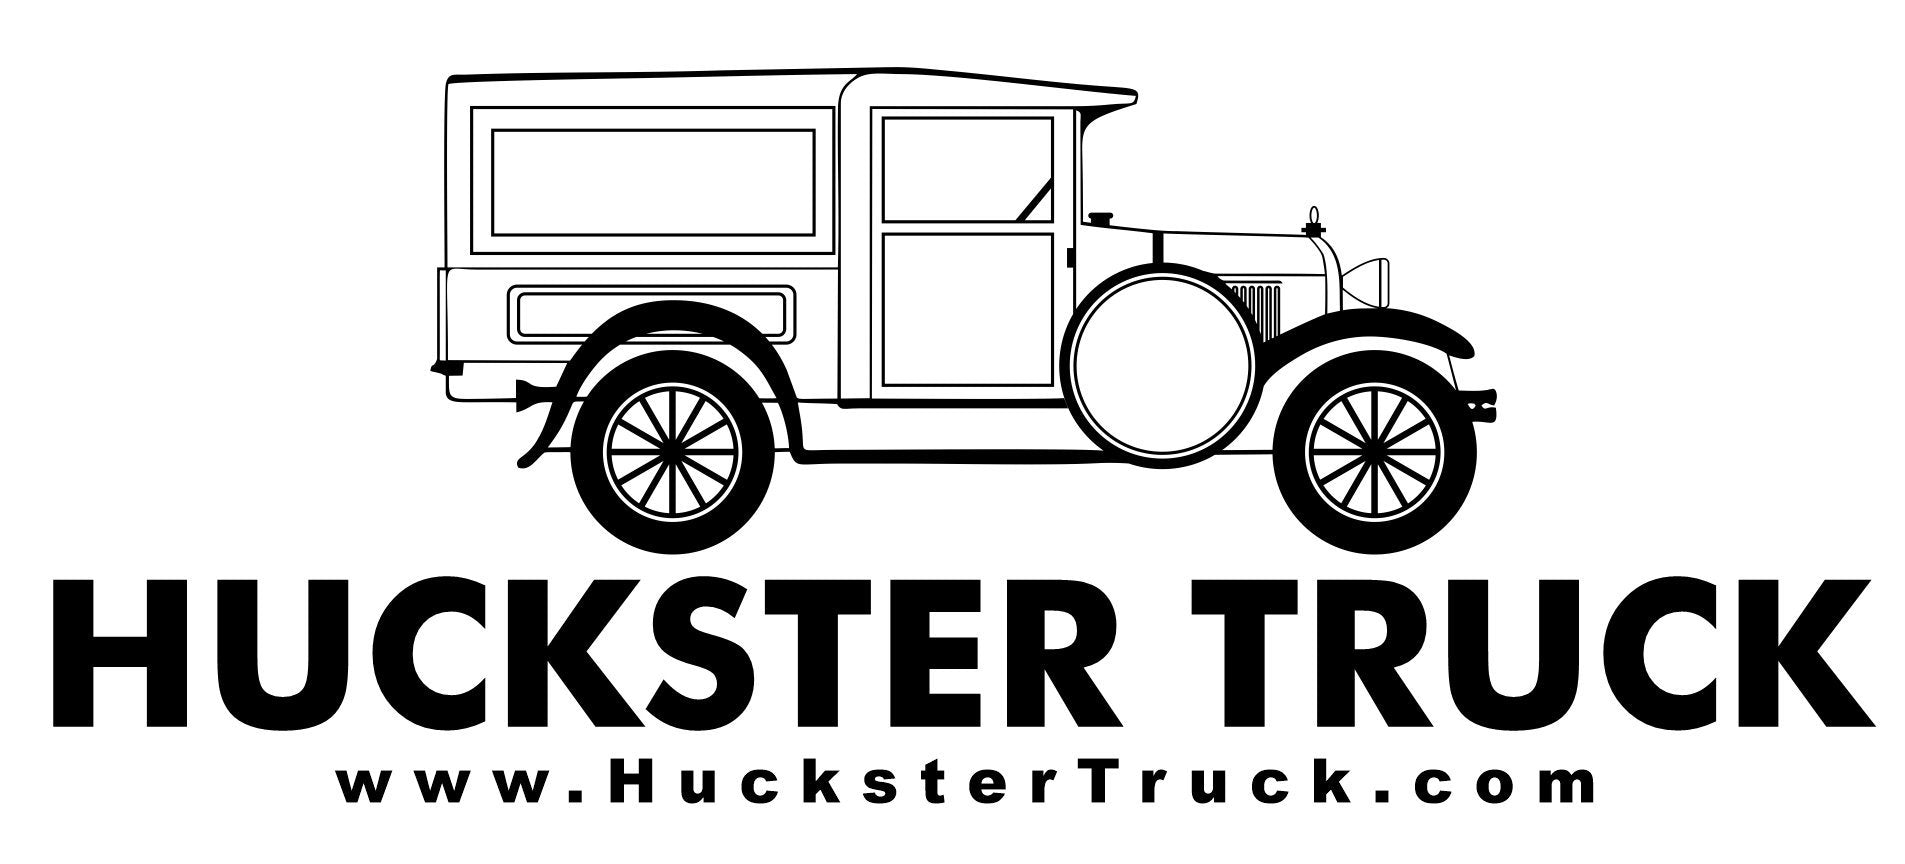 Upcycled and Inspired – Huckster Truck